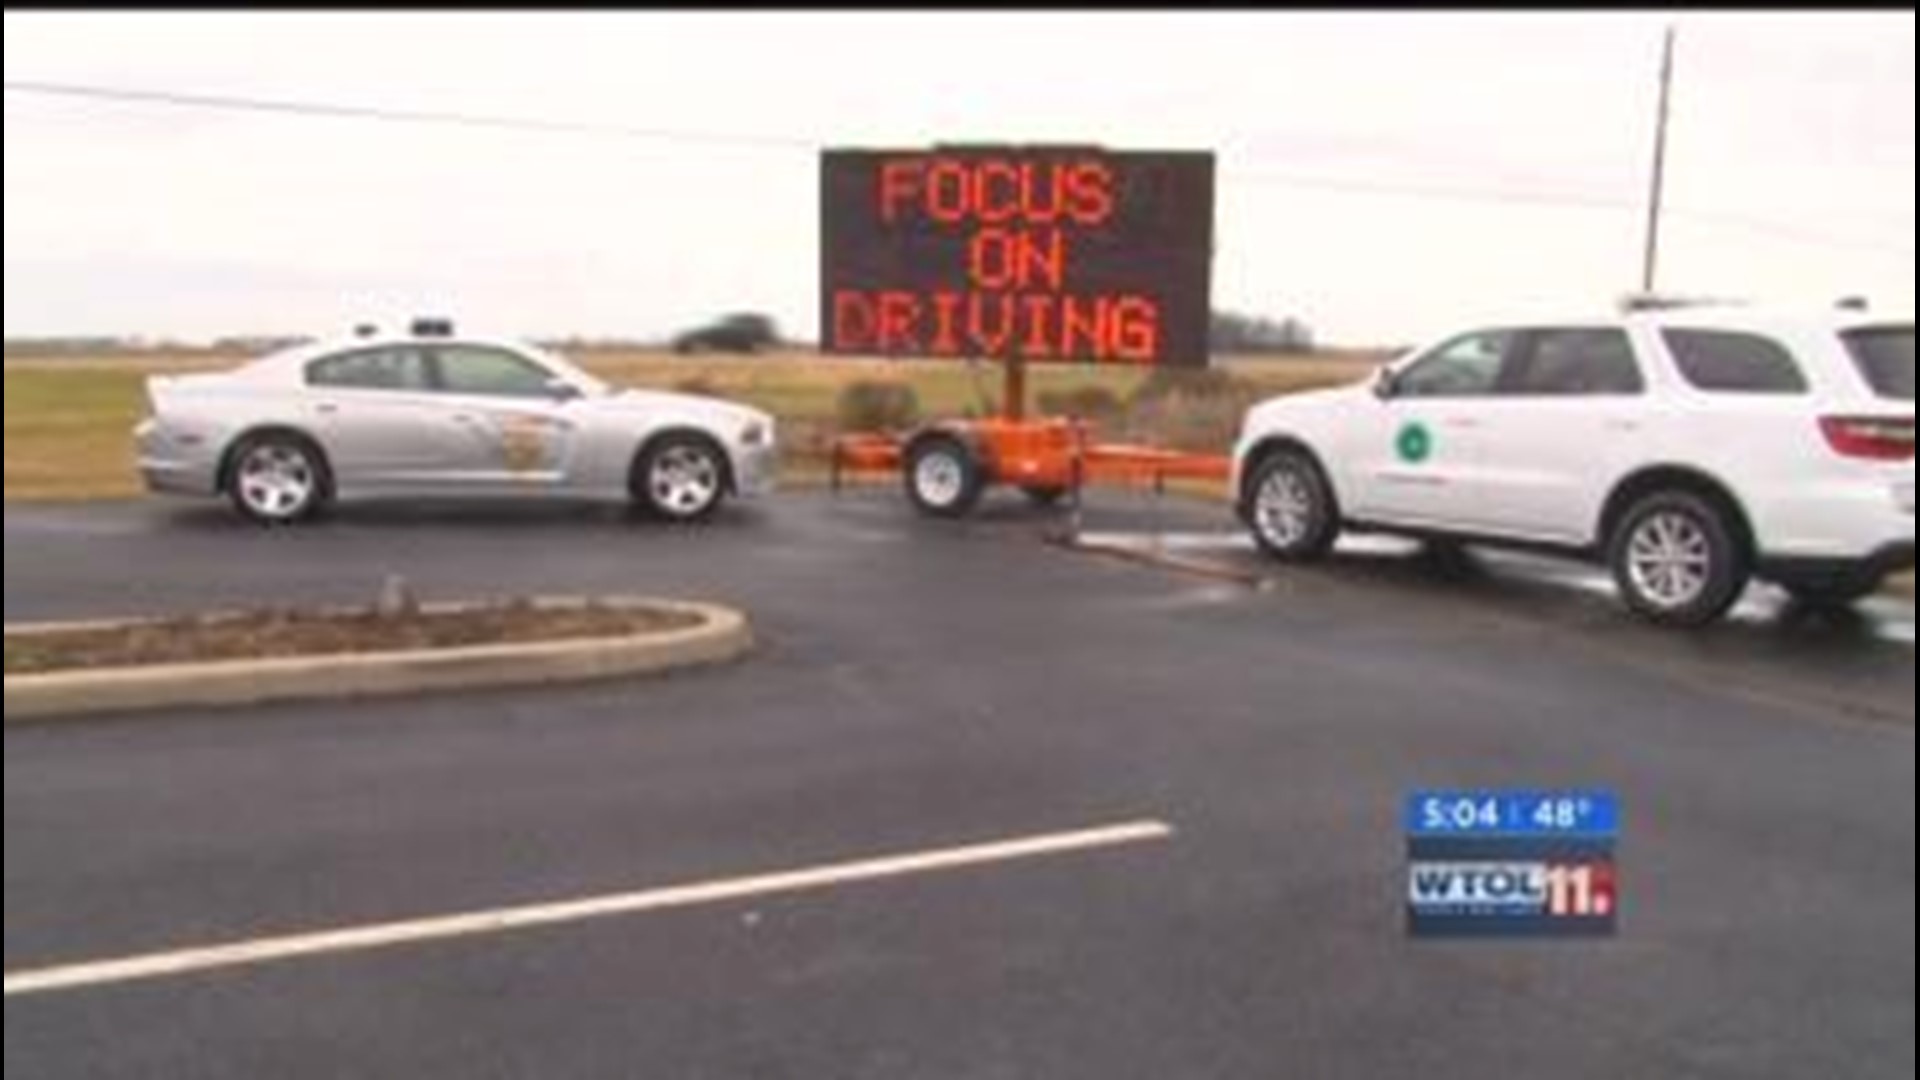 OSHP, ODOT urge caution for holiday travel